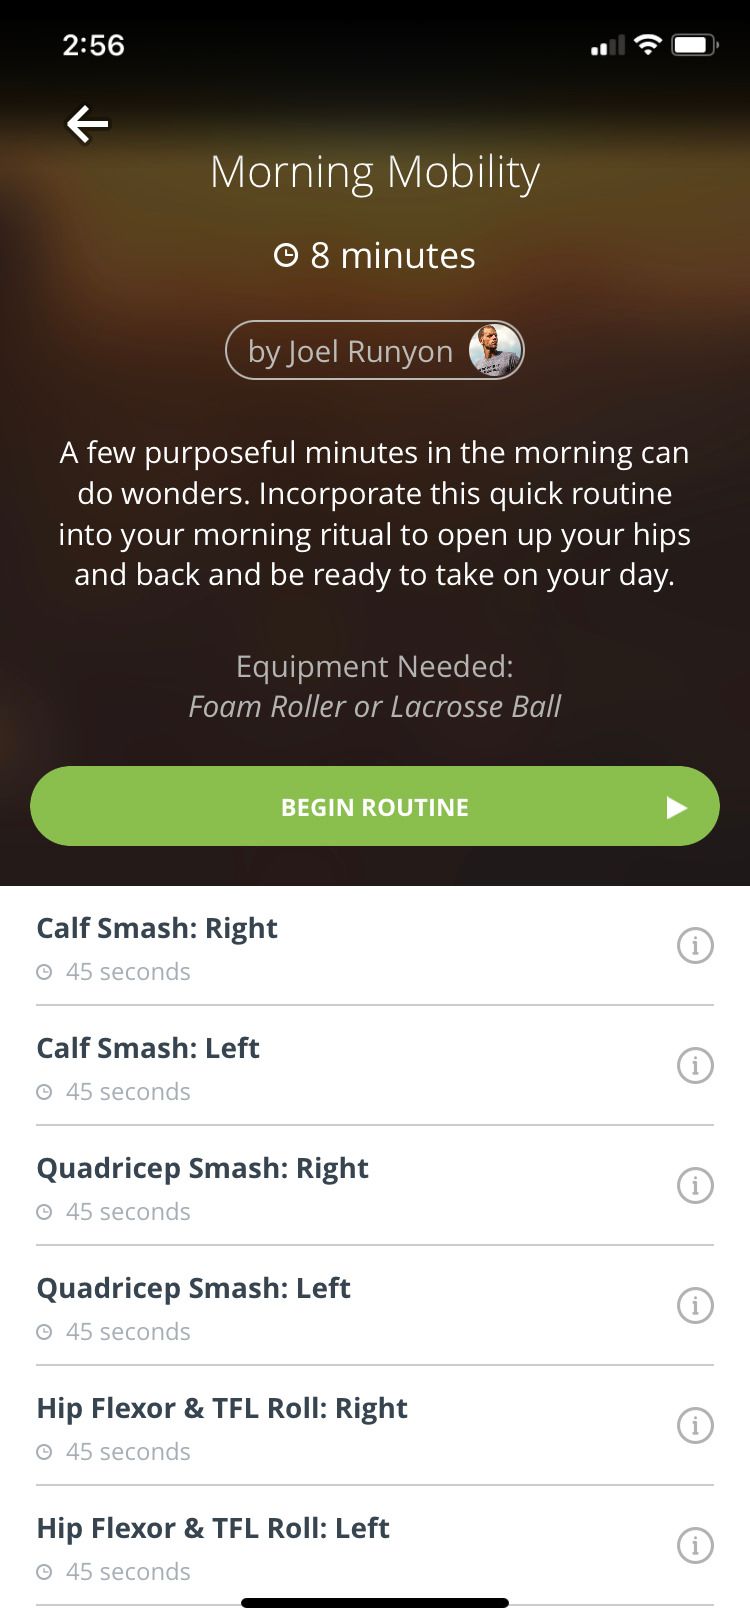 Move Well - Mobility Routines app morning mobility routine